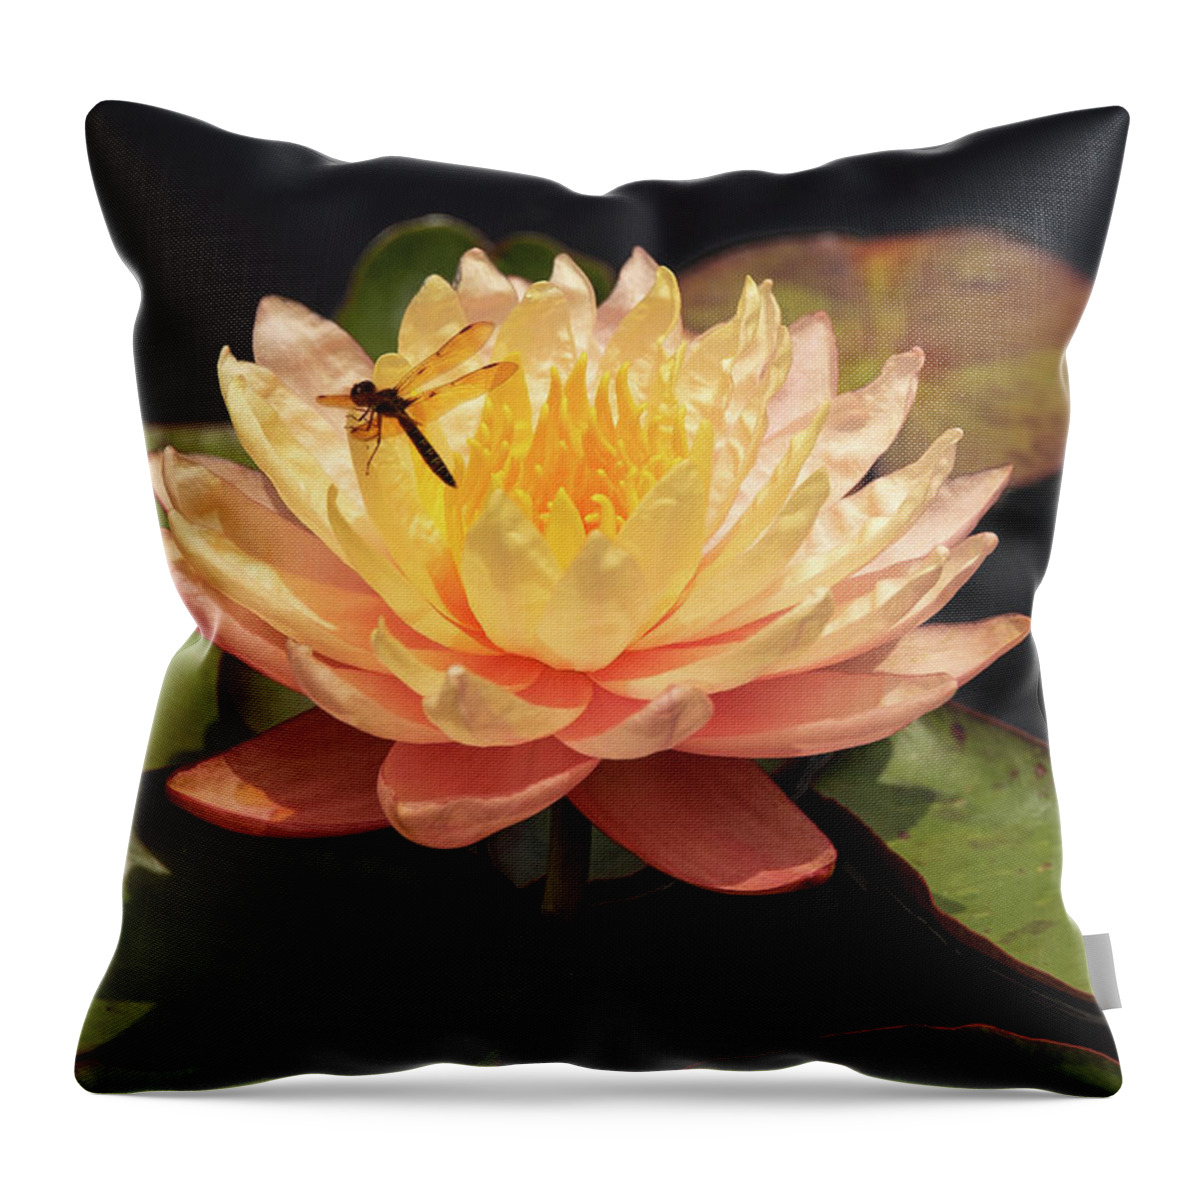 Flowers Throw Pillow featuring the photograph Waterlily by Minnie Gallman